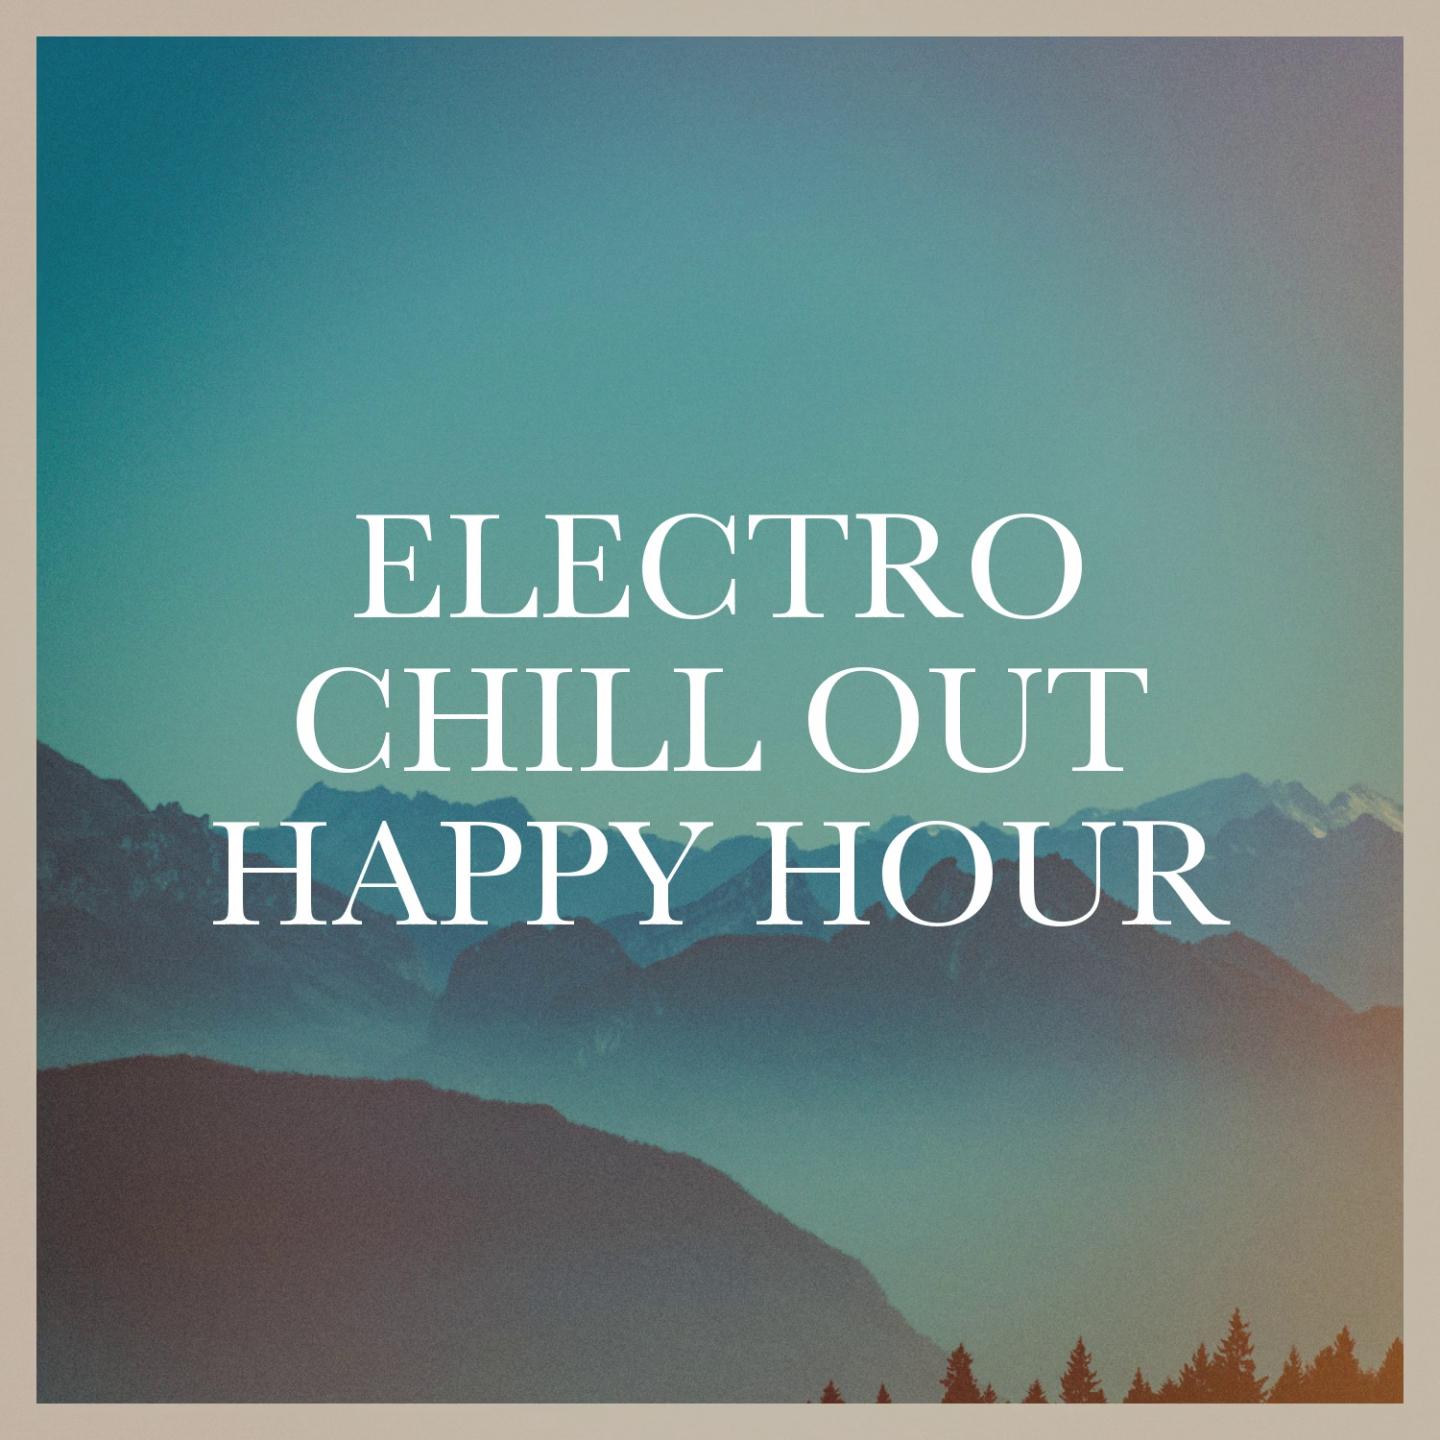 Electro Chill out Happy Hour